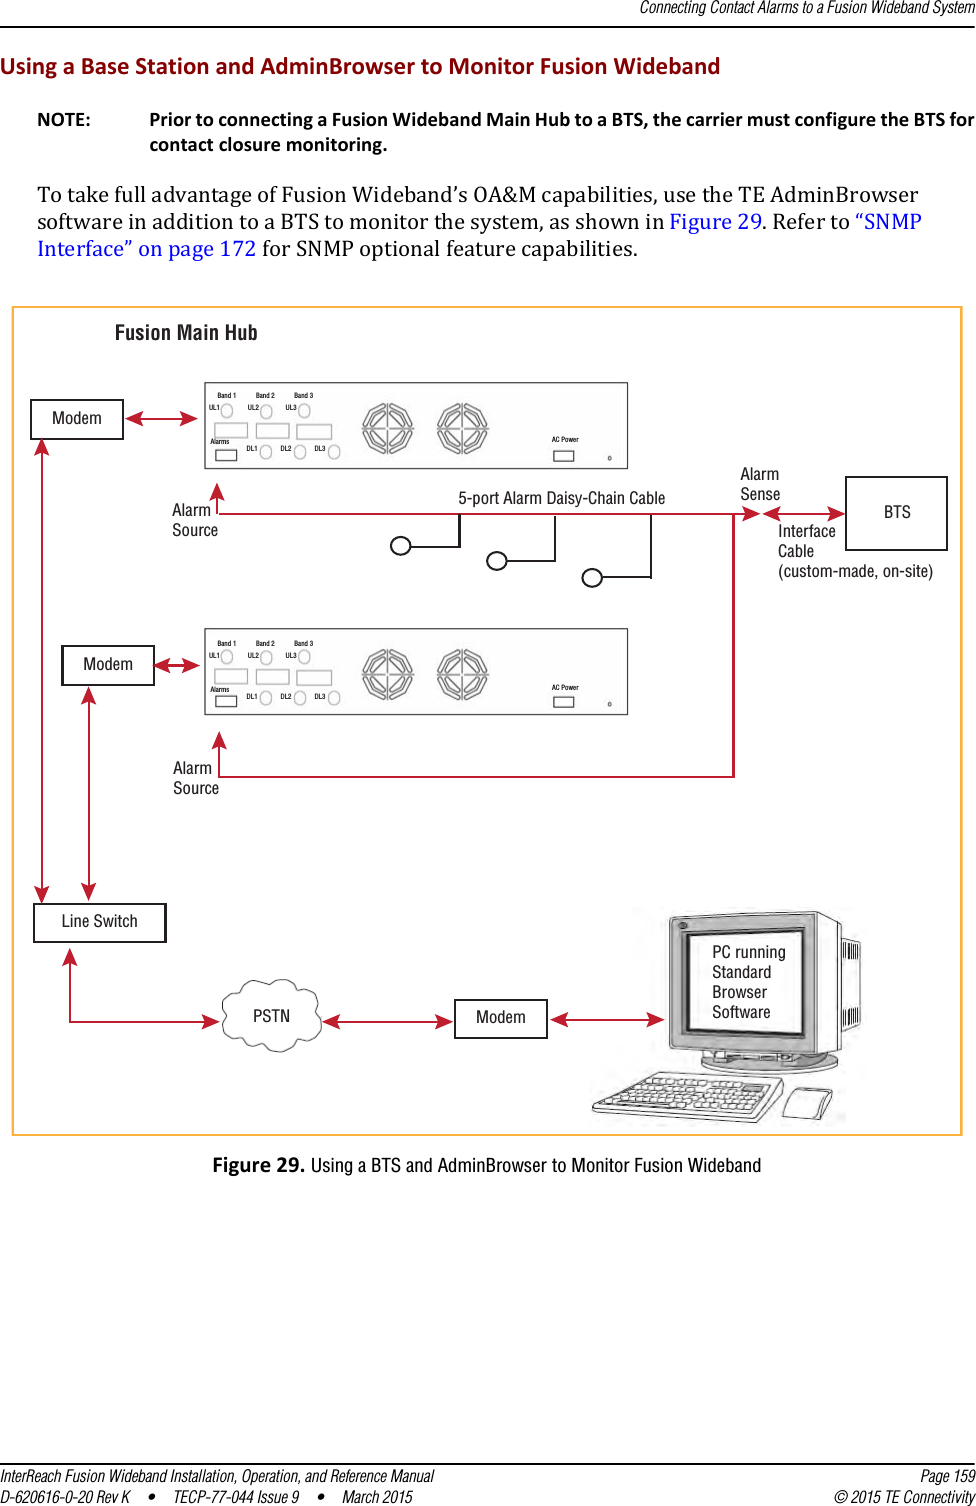 Connecting Contact Alarms to a Fusion Wideband SystemInterReach Fusion Wideband Installation, Operation, and Reference Manual Page 159D-620616-0-20 Rev K  •  TECP-77-044 Issue 9  •  March 2015 © 2015 TE ConnectivityUsing a Base Station and AdminBrowser to Monitor Fusion WidebandNOTE: Prior to connecting a Fusion Wideband Main Hub to a BTS, the carrier must configure the BTS for contact closure monitoring.To take full advantage of Fusion Wideband’s OA&amp;M capabilities, use the TE AdminBrowser software in addition to a BTS to monitor the system, as shown in Figure 29. Refer to “SNMP Interface” on page 172 for SNMP optional feature capabilities.Figure 29. Using a BTS and AdminBrowser to Monitor Fusion WidebandBand 1 Band 2 Band 3UL1 UL2 UL3AlarmsDL1 DL2 DL3AC PowerFusion Main HubAlarmSense5-port Alarm Daisy-Chain CableAlarmSourceBTSPSTNInterfaceCable(custom-made, on-site)PC runningStandardBrowserSoftwareModemLine SwitchModemBand 1 Band 2 Band 3UL1 UL2 UL3AlarmsDL1 DL2 DL3AC PowerModemAlarmSource